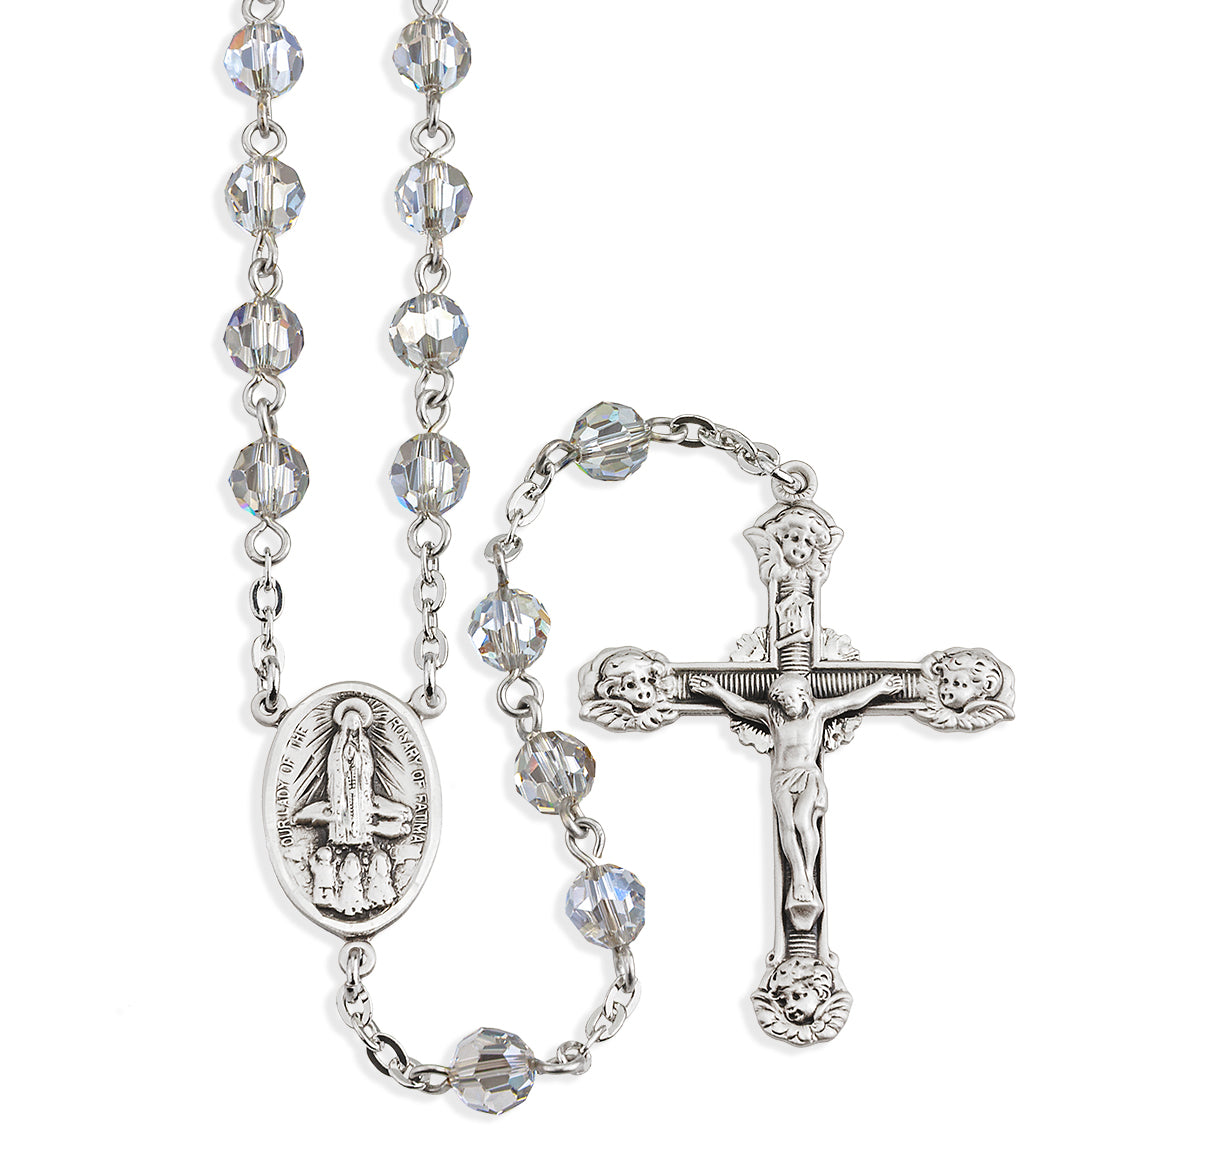 Rosary Sterling Crucifix and Centerpiece Created with Swarovski Crystal 6mm Faceted Round Smoked Beads by HMH